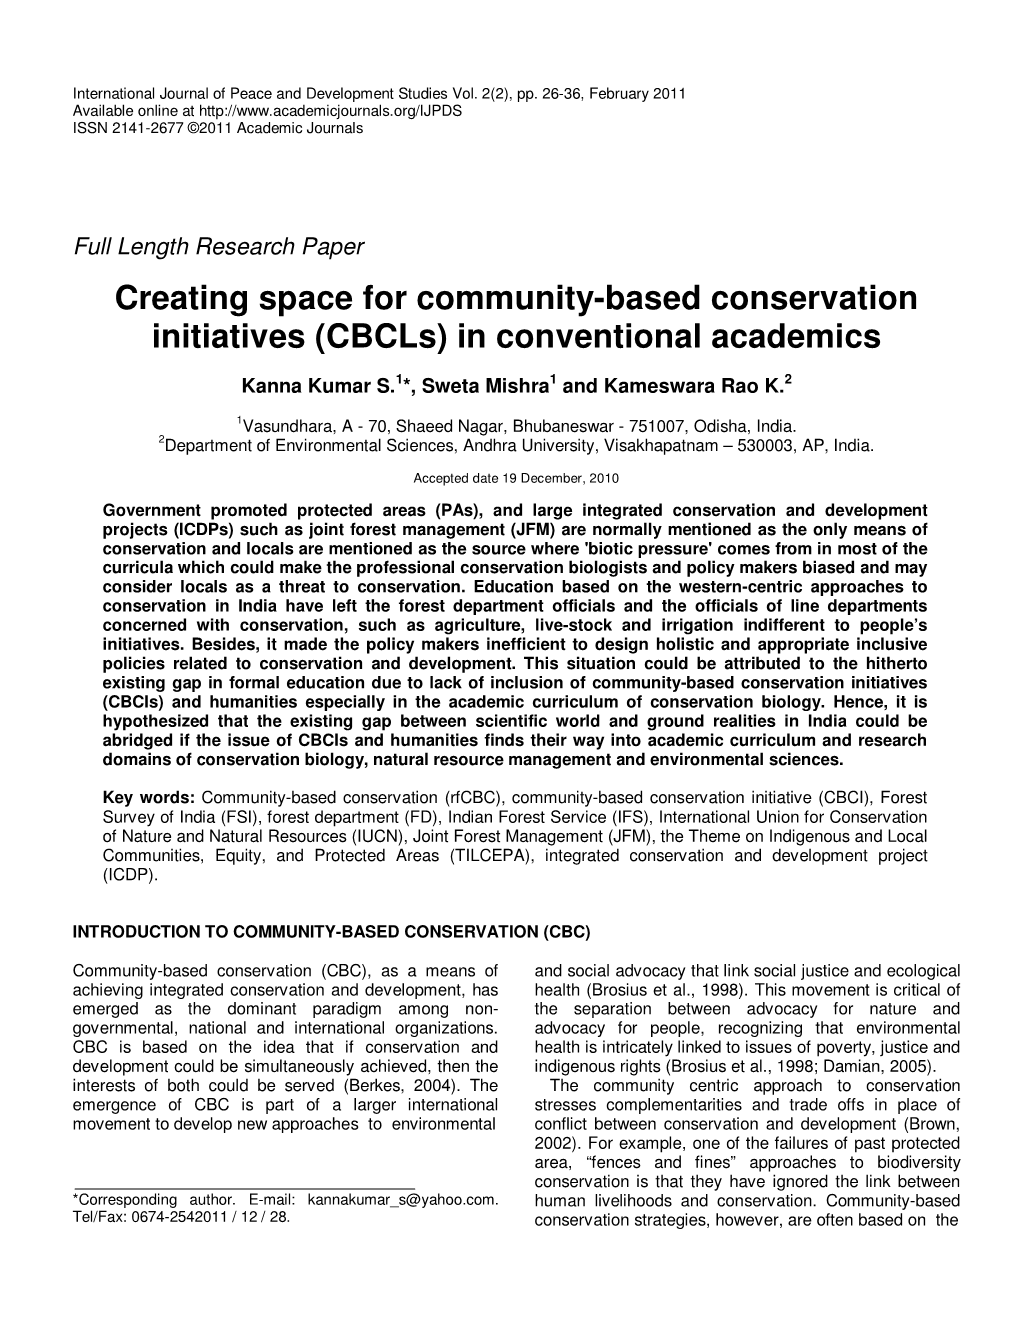 Creating Space for Community-Based Conservation Initiatives (Cbcls) in Conventional Academics